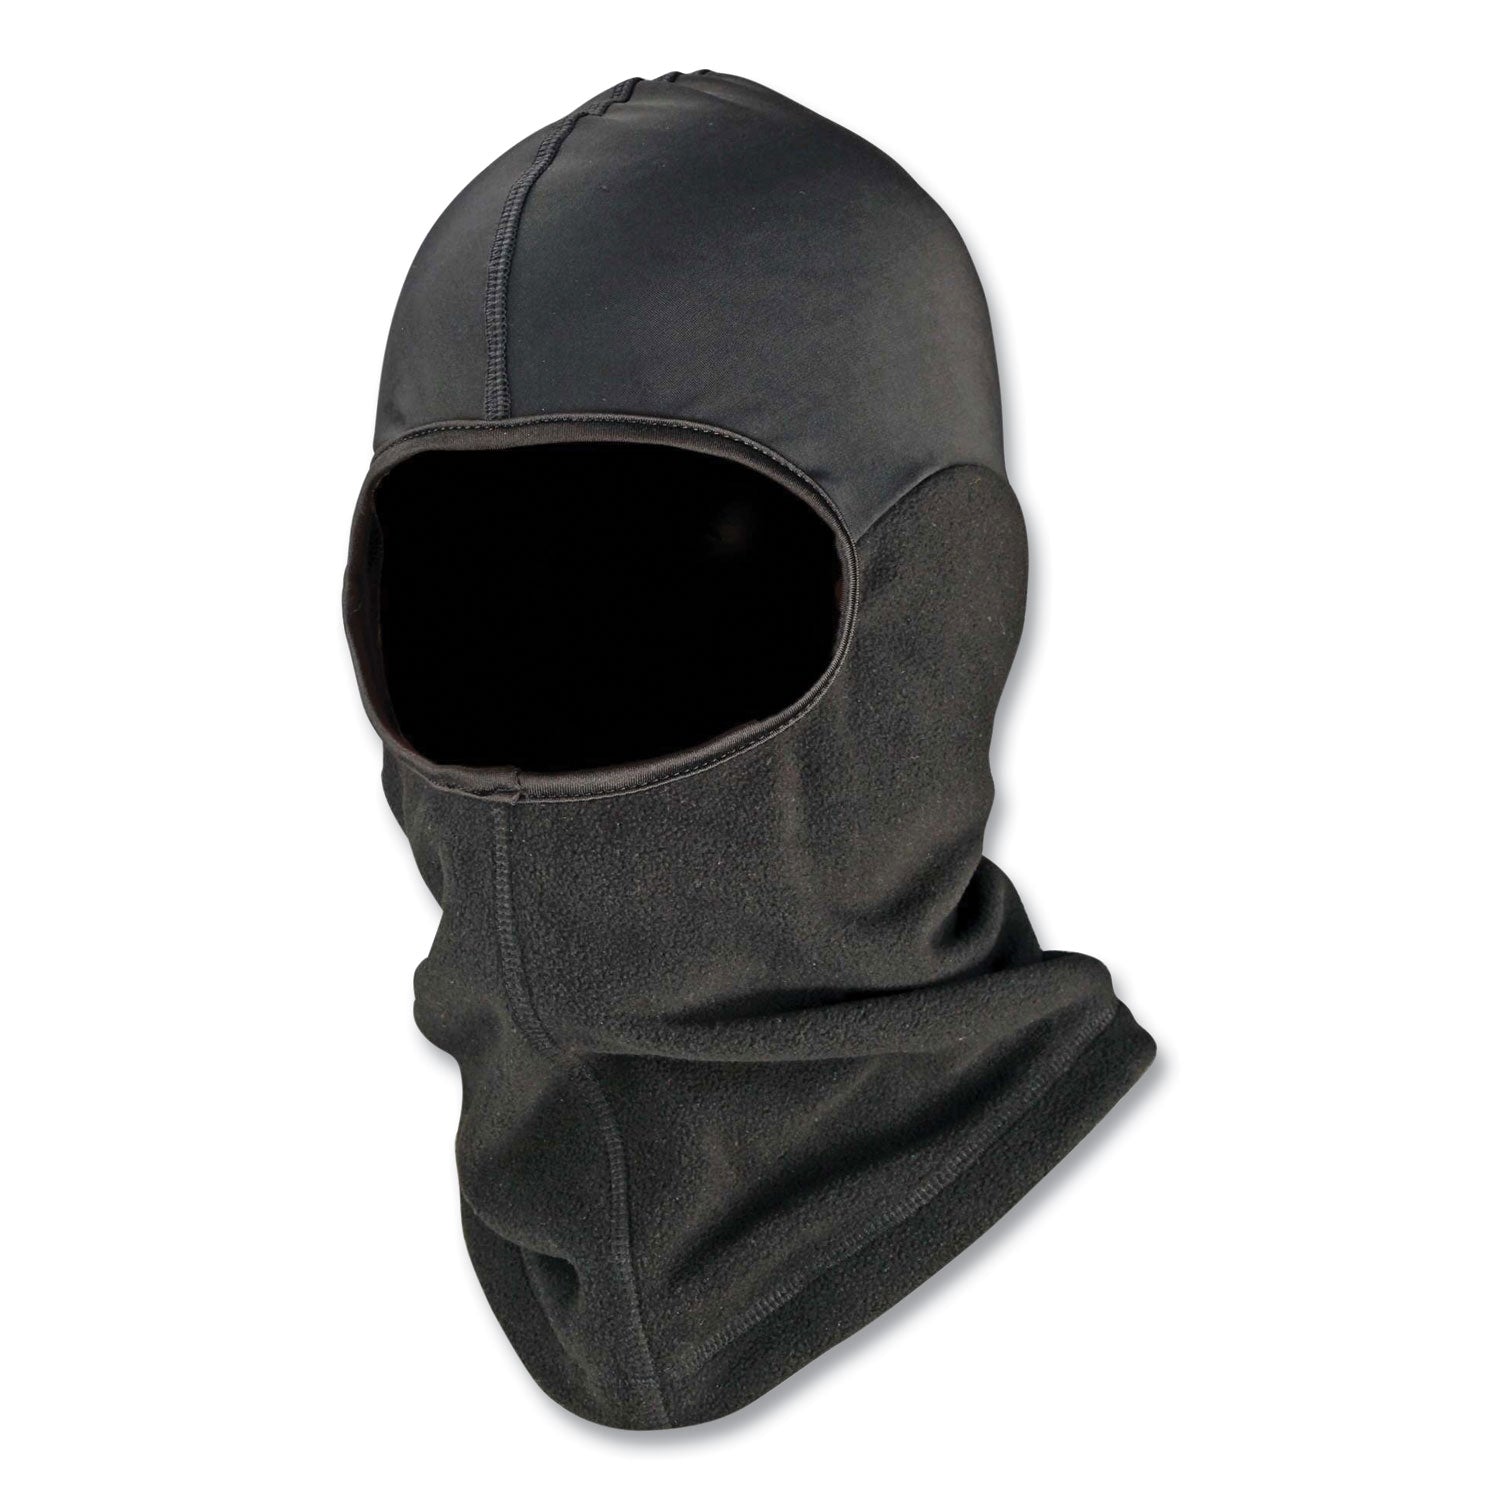 n-ferno-6822-balaclava-spandex-top-face-mask-spandex-fleece-one-size-fits-most-black-ships-in-1-3-business-days_ego16822 - 1